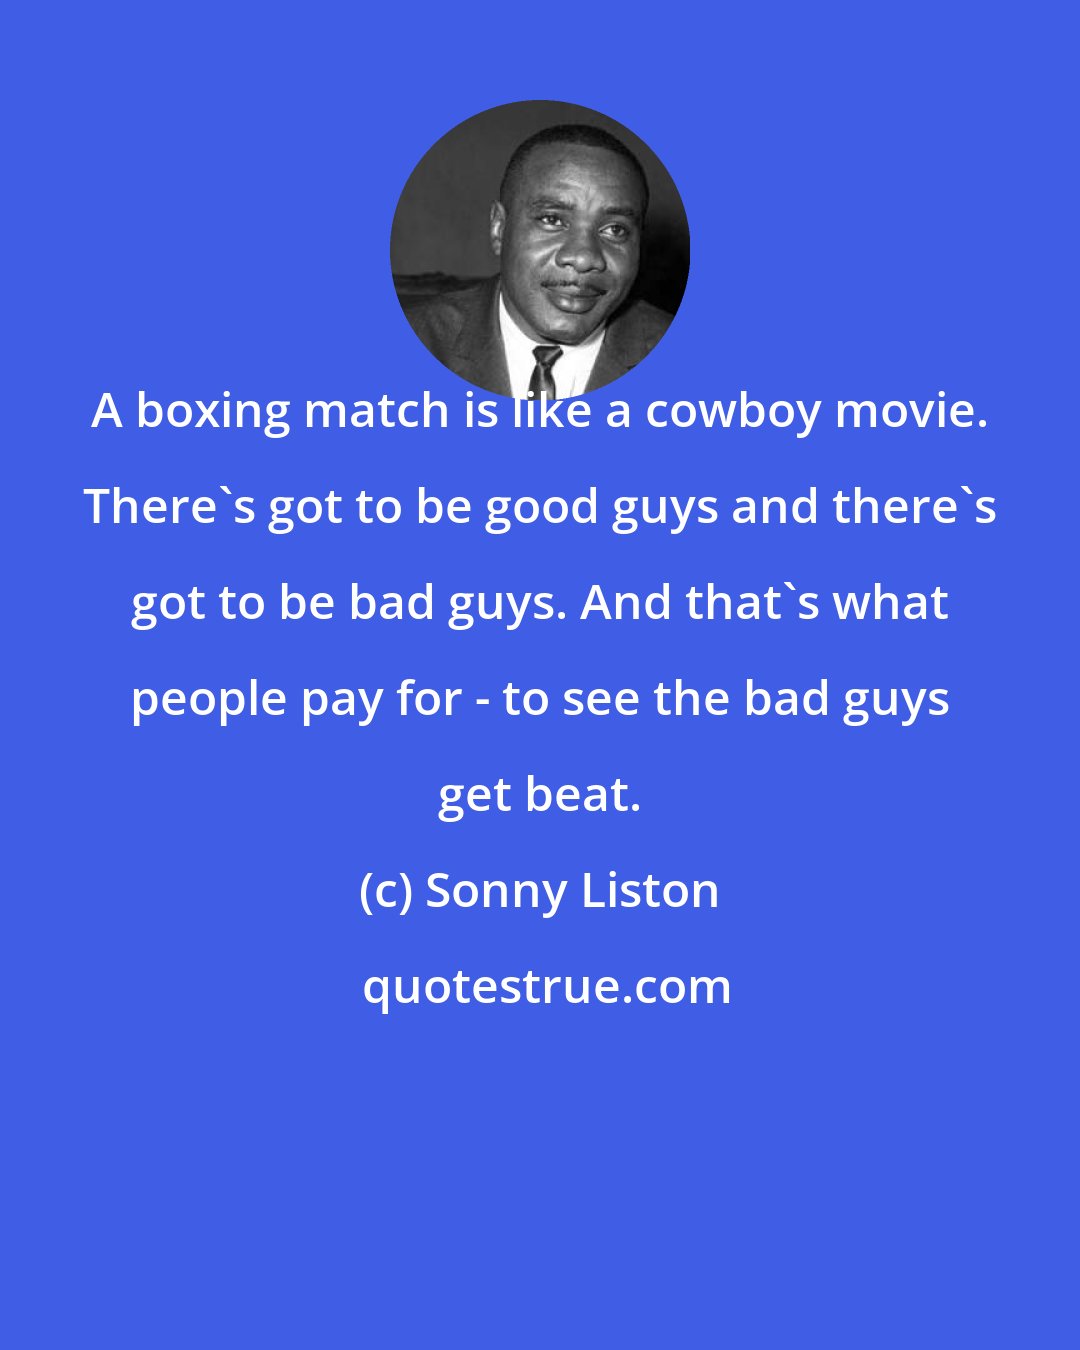 Sonny Liston: A boxing match is like a cowboy movie. There's got to be good guys and there's got to be bad guys. And that's what people pay for - to see the bad guys get beat.